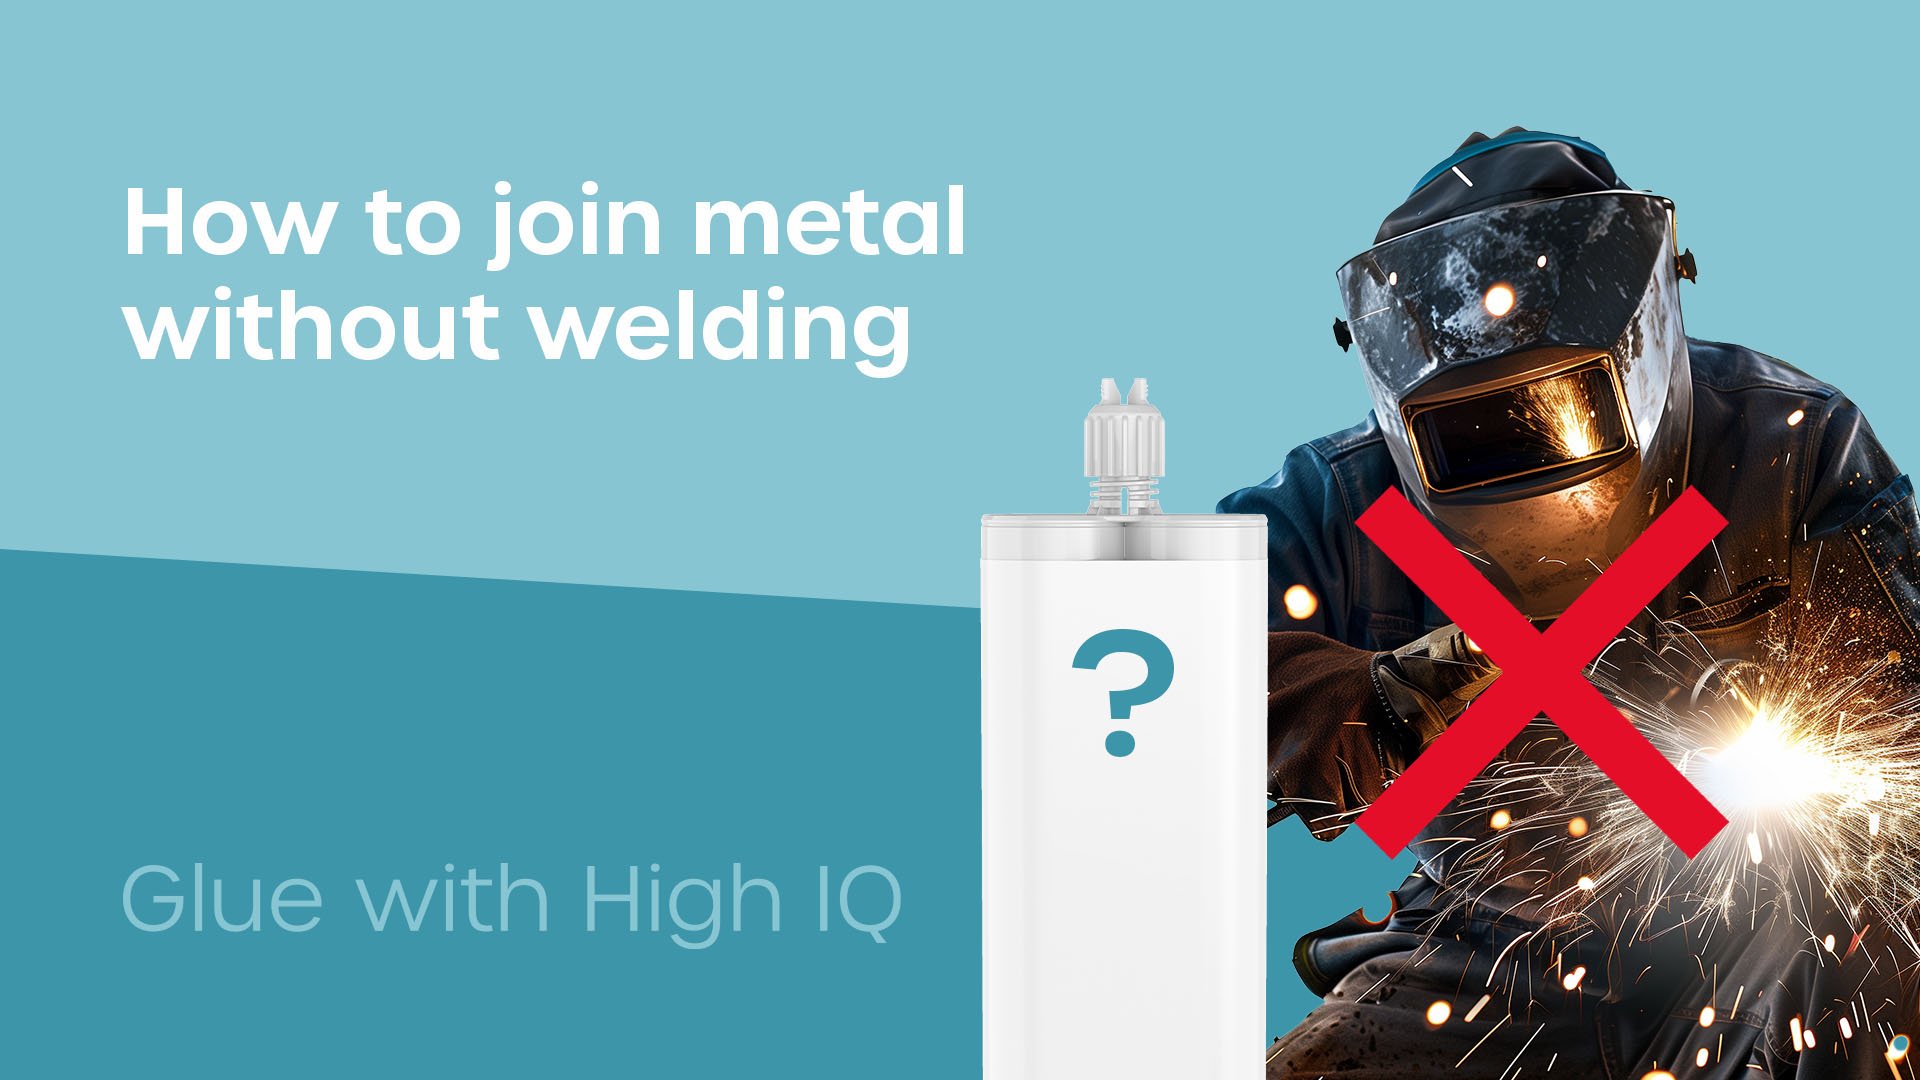 Joining metal to metal without welding